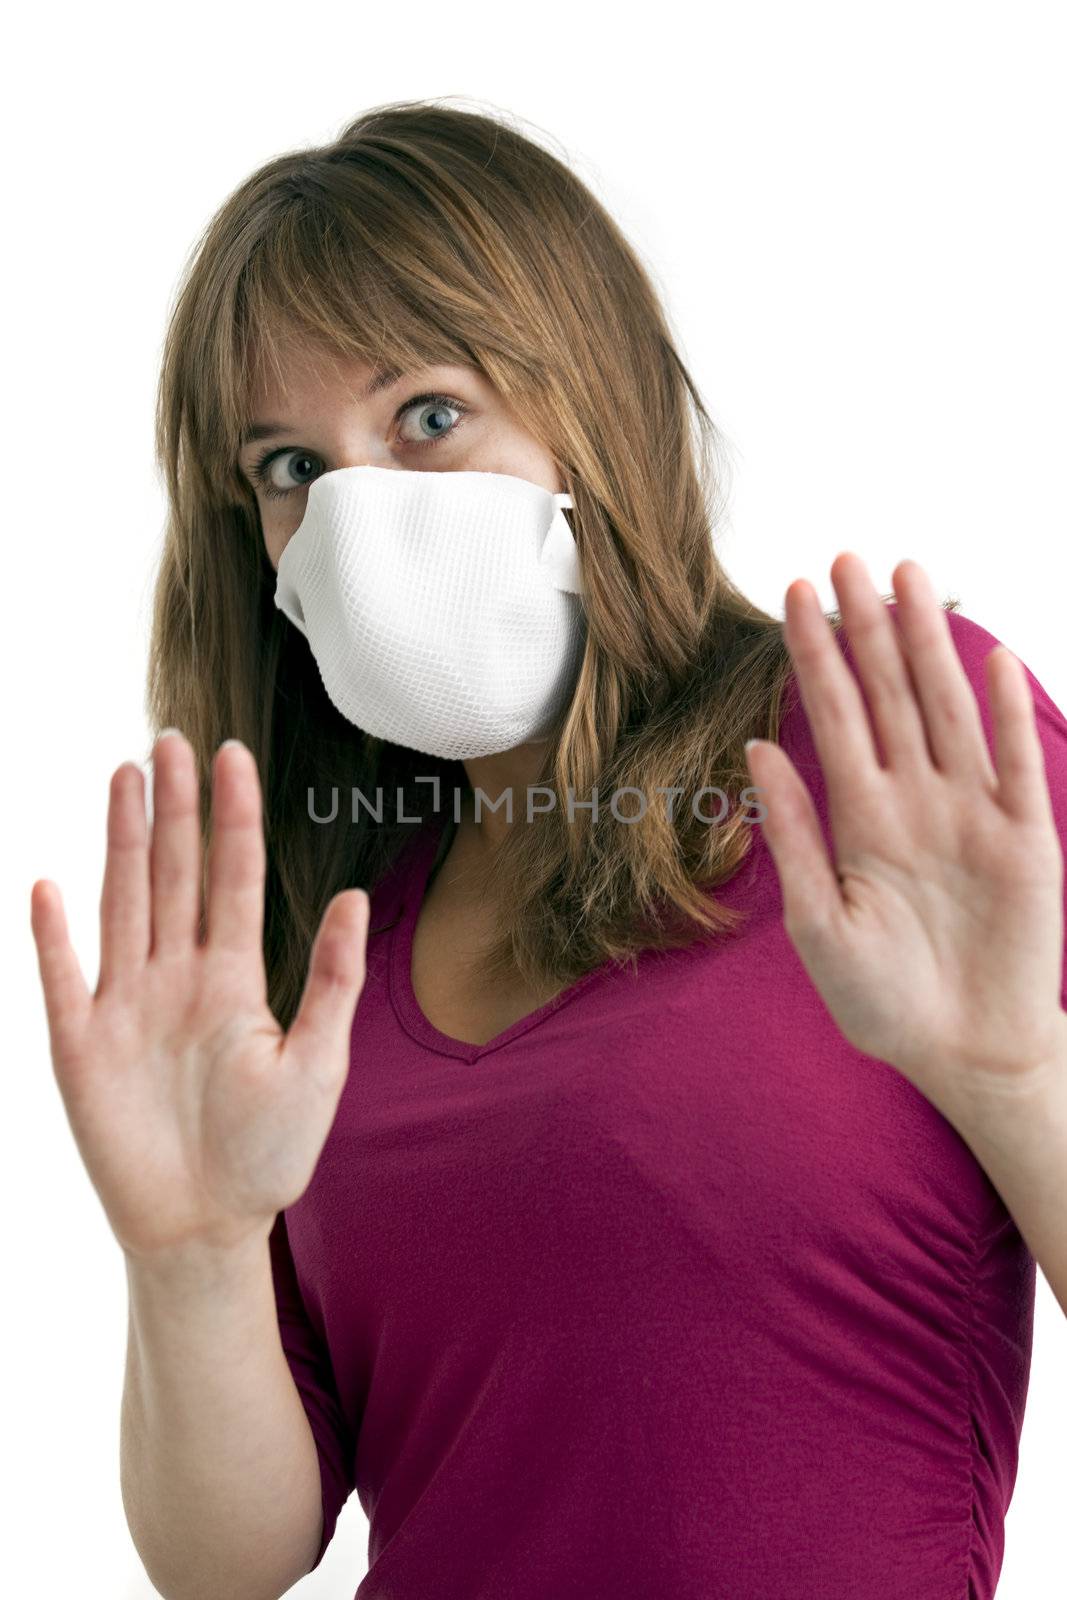 scared young woman wearing a protective mask to protect her from swine flu by bernjuer